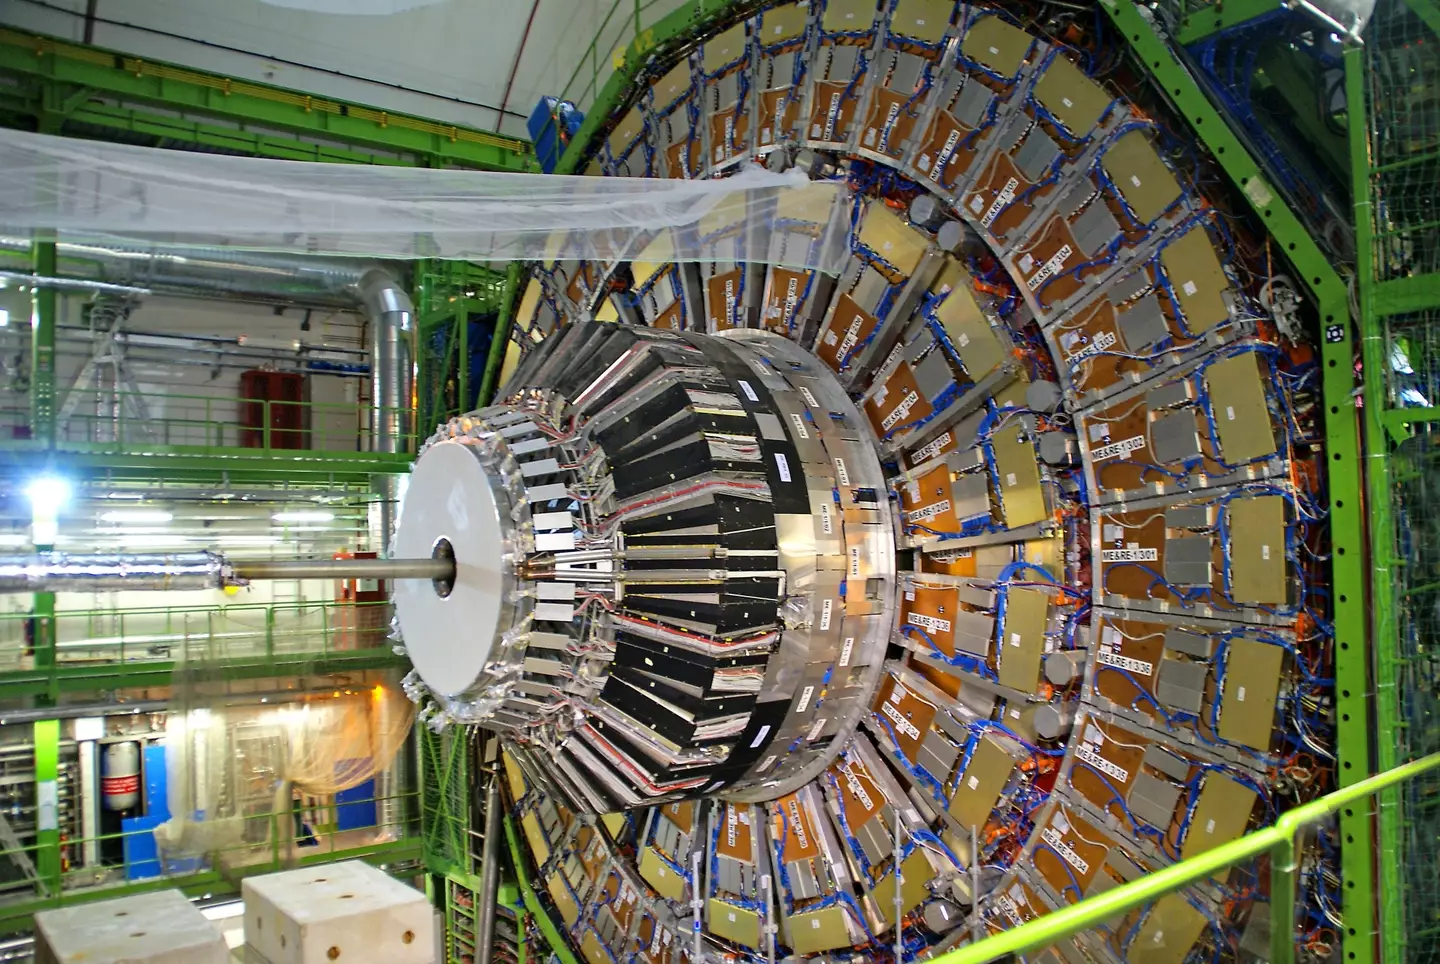 The Large Hadron Collider.